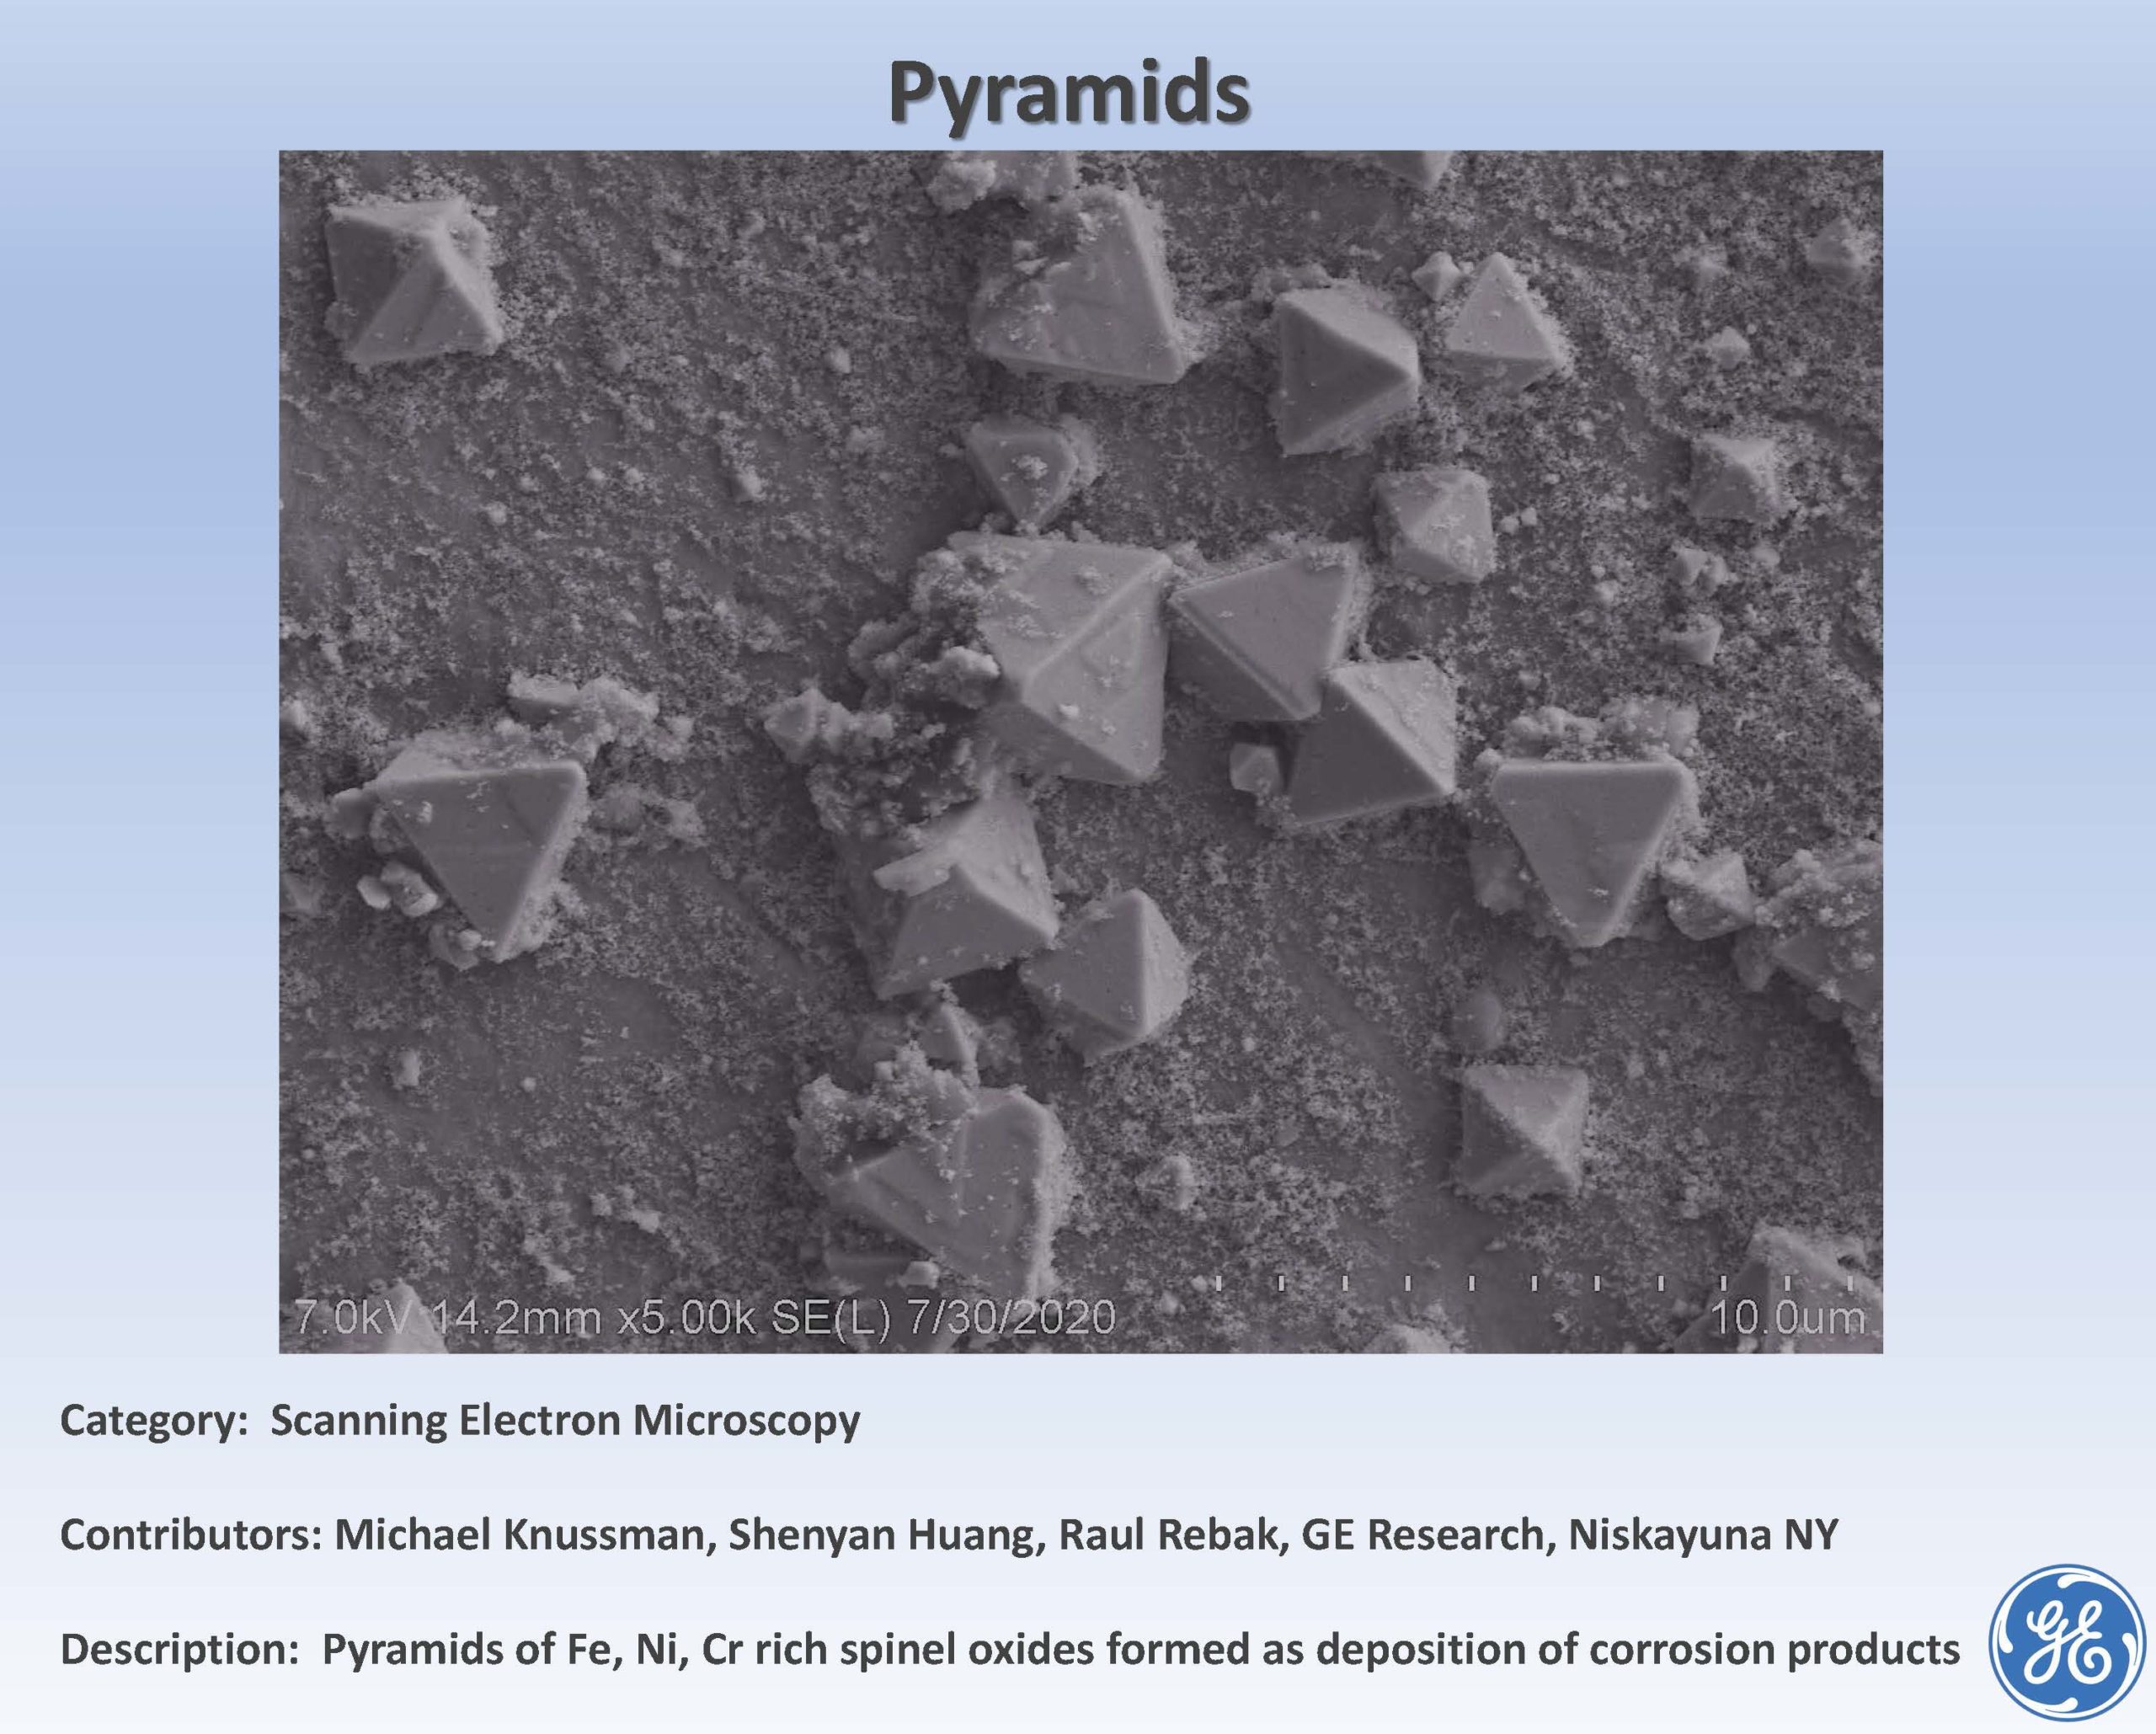 Pyramids_GE Research_2020 Ceramographic Competition